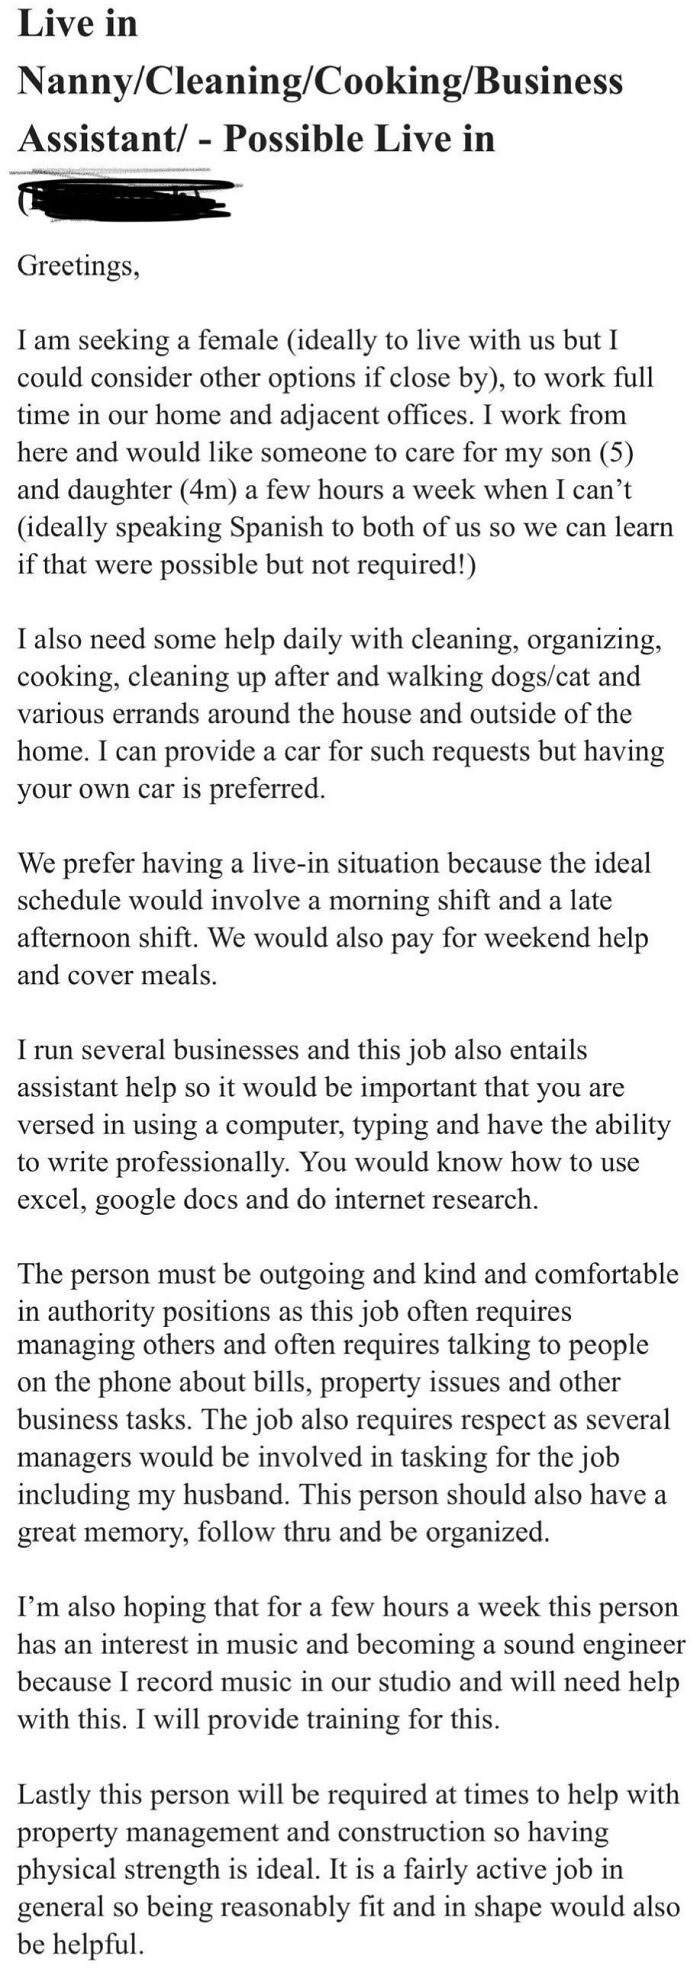 Be My Nanny, Maid, Dog-Walker, Cat-Carer, Personal Assistant, Researcher, Professional Writer, Property Manager And Also Commit To Me For Three Years